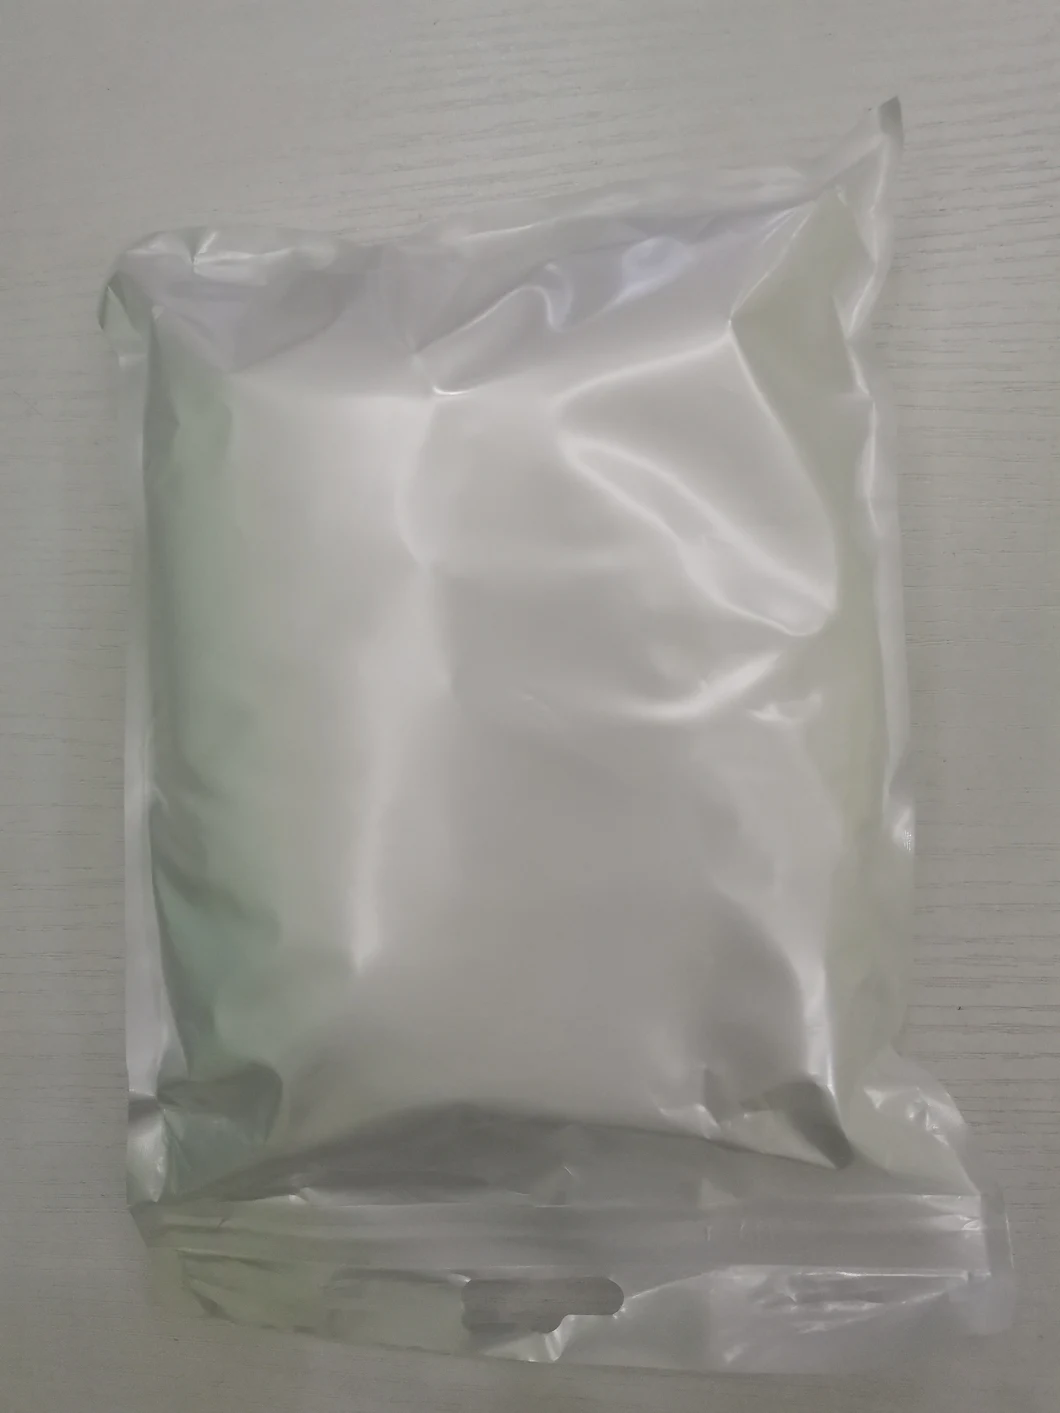 Factory Stock Masks Masks Masks Non-Woven Fabric 5 Layers 95% Filtration